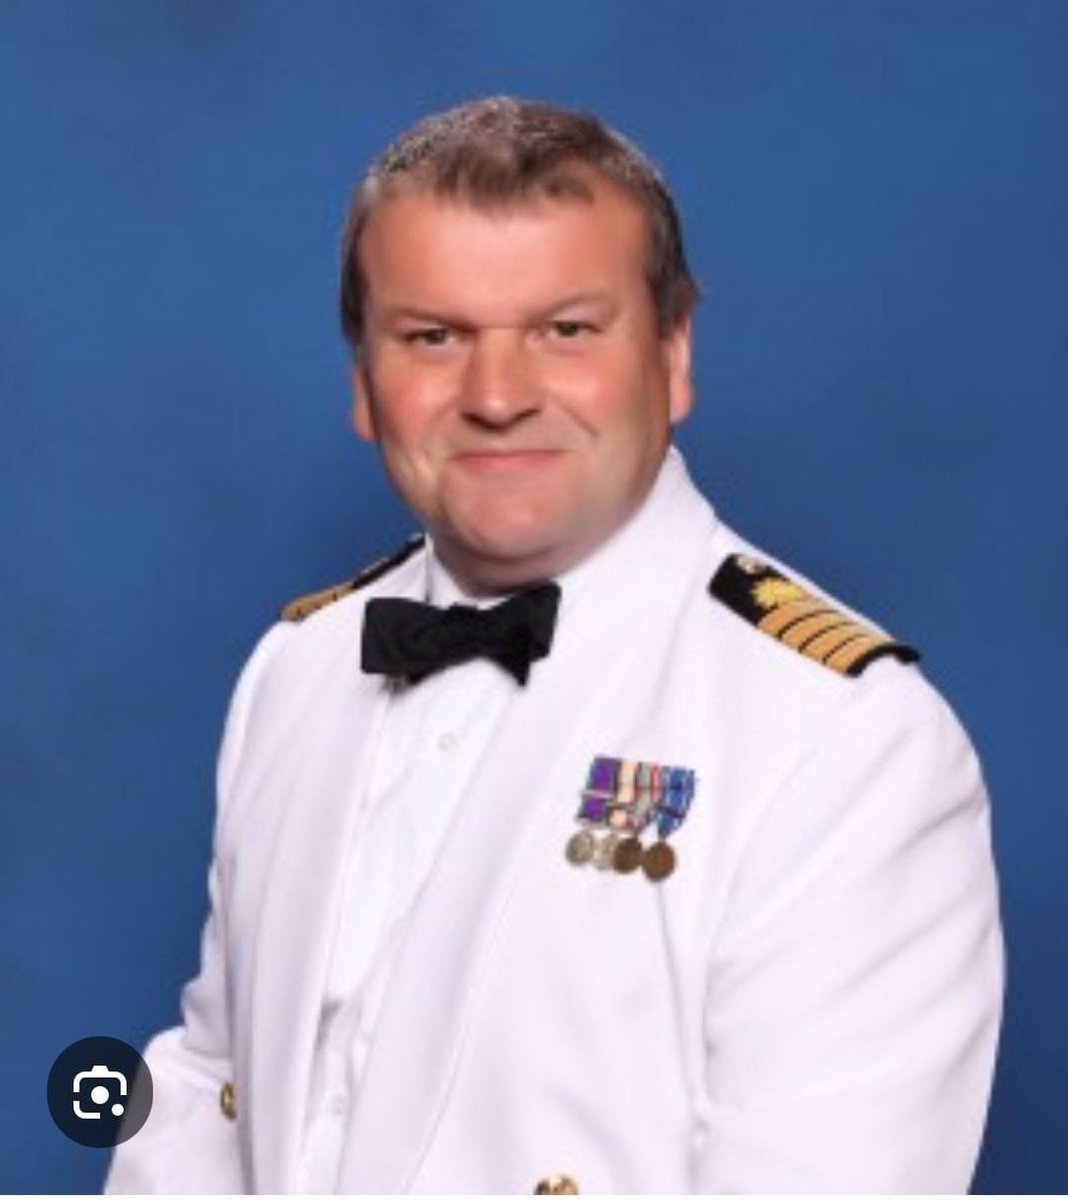 Incredibly sad news that Charlie Carr died yesterday (05 April 2024). Charlie joined the RFA in 1974 and joined P&O Cruises in the mid-90s where he rose to the rank of Captain and become very popular in Command of such ships as ORIANA and VENTURA. Sad loss